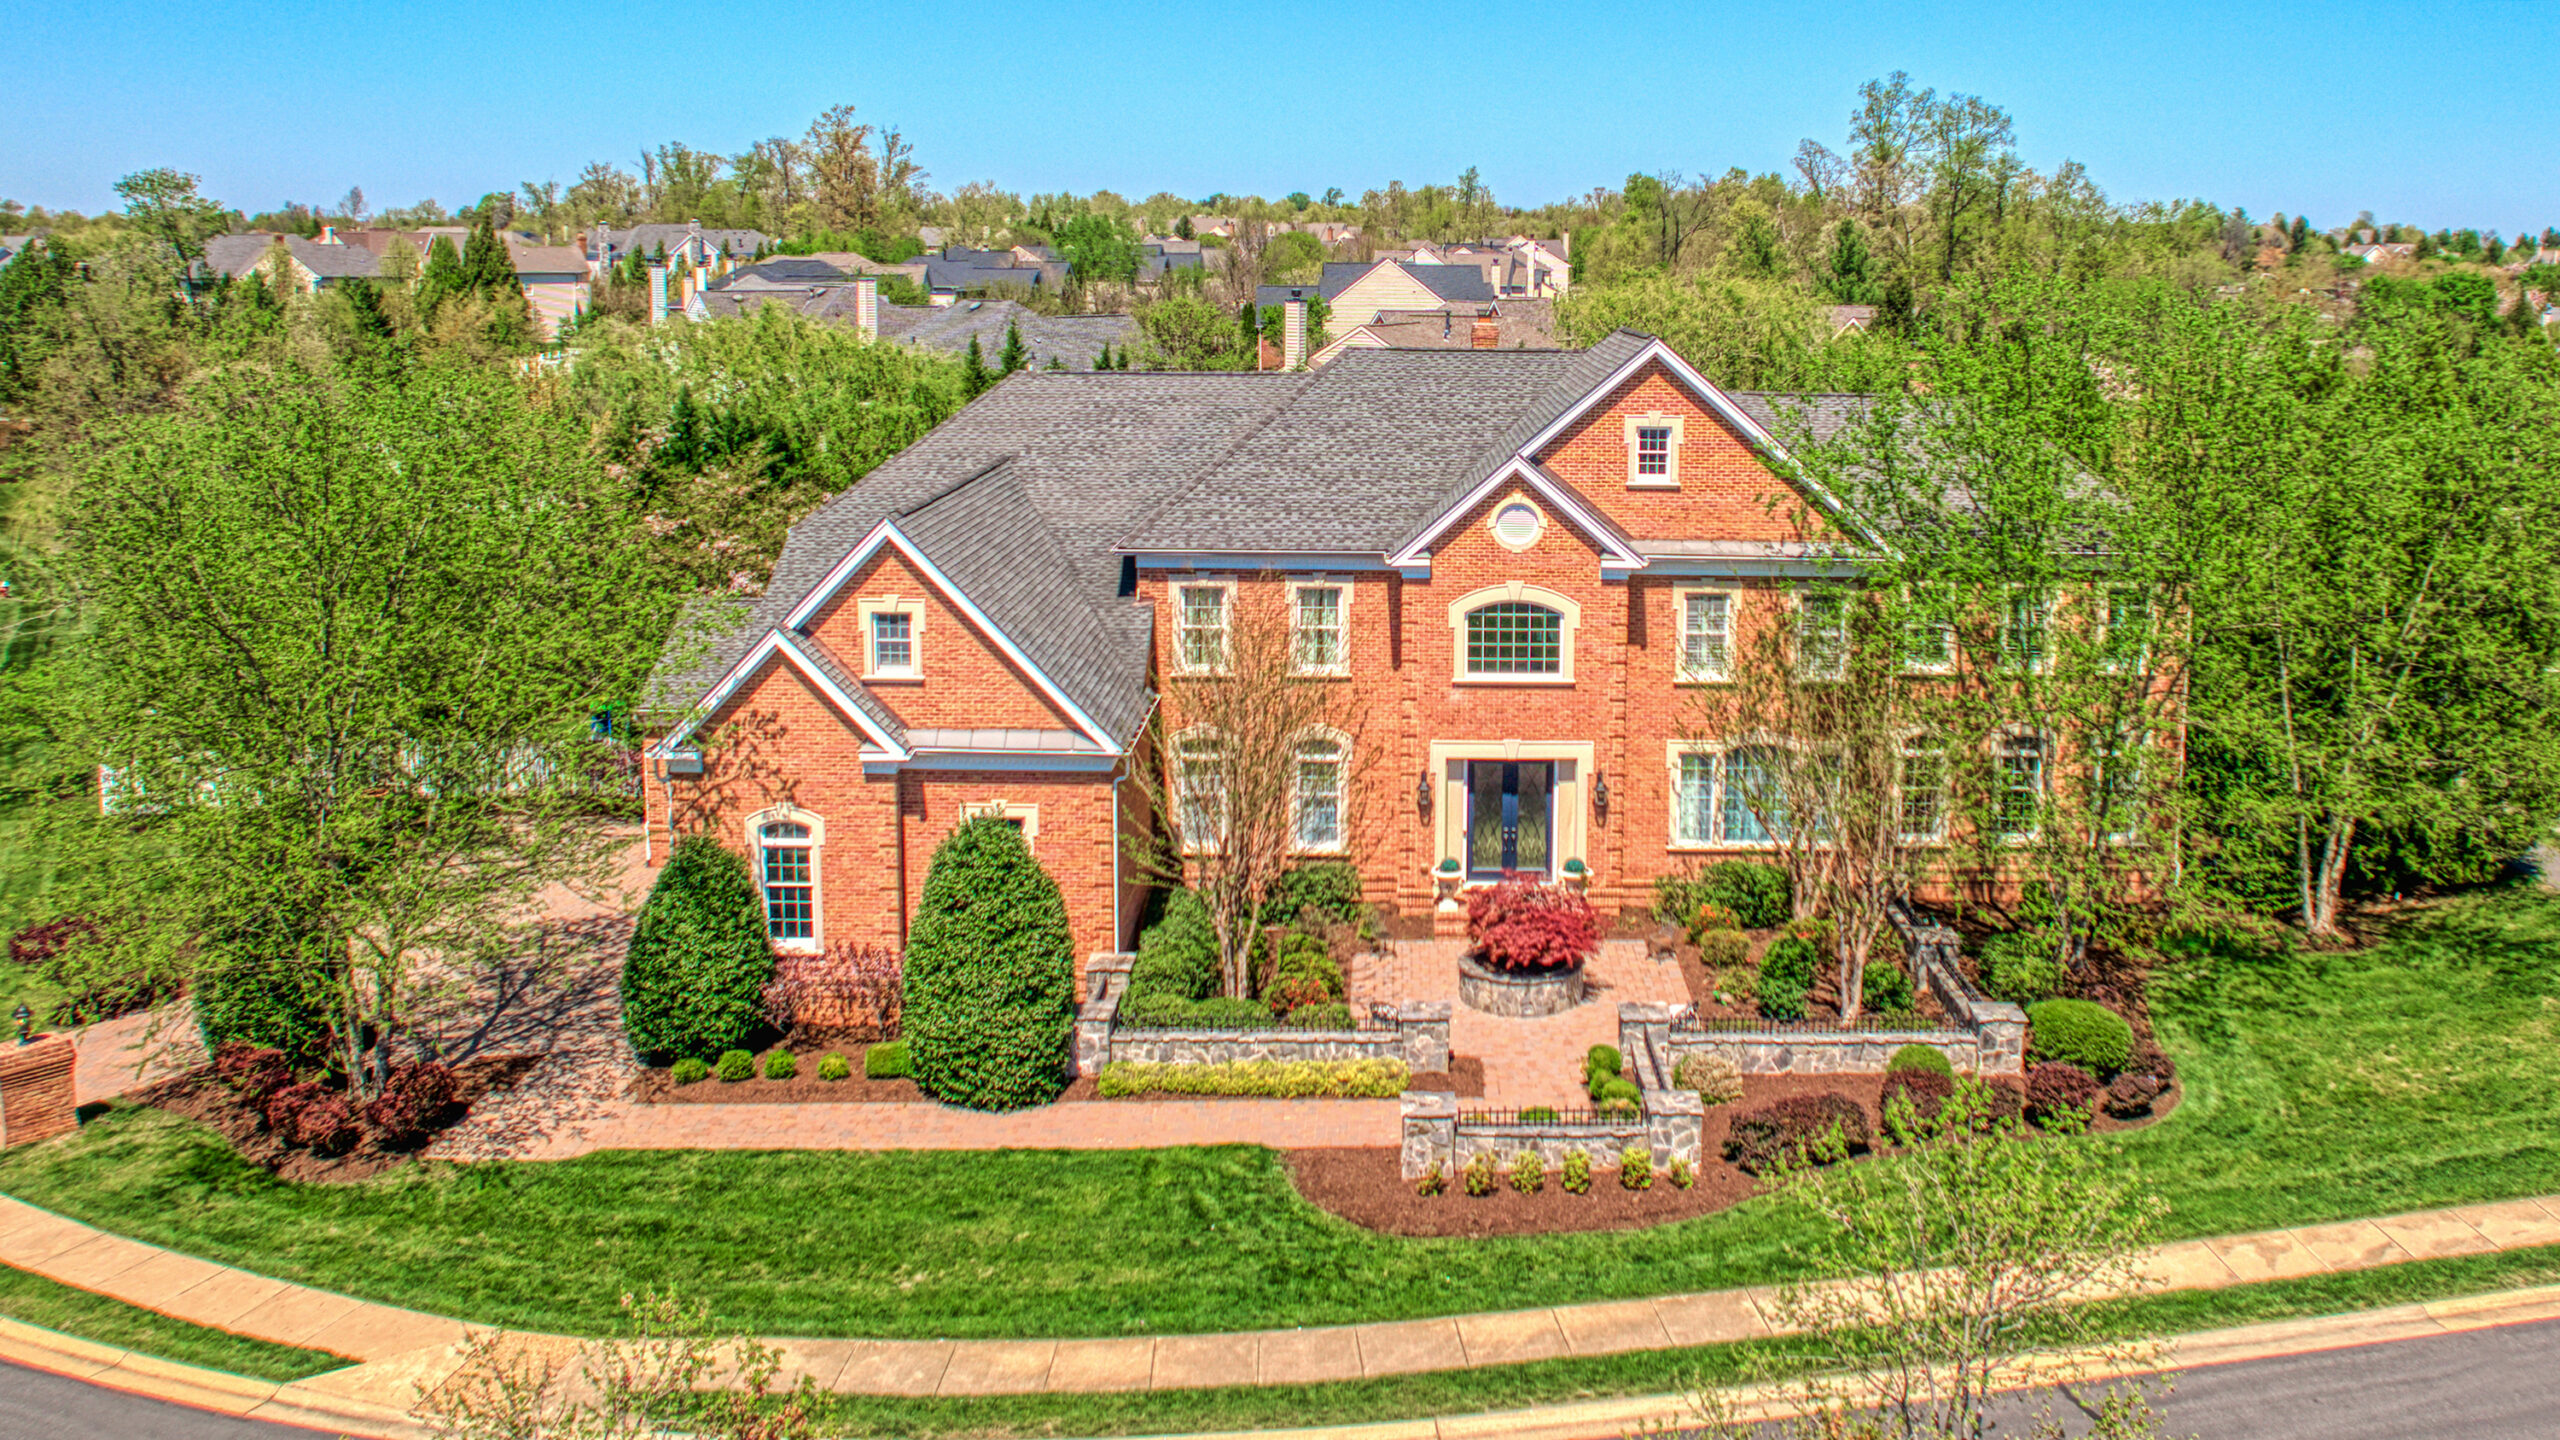 Professional exterior photo shot by Sky Blue Media using Fusion Photography in 2023 showing true, crisp, vibrant colors in an aerial photo of the front of a stately brick home